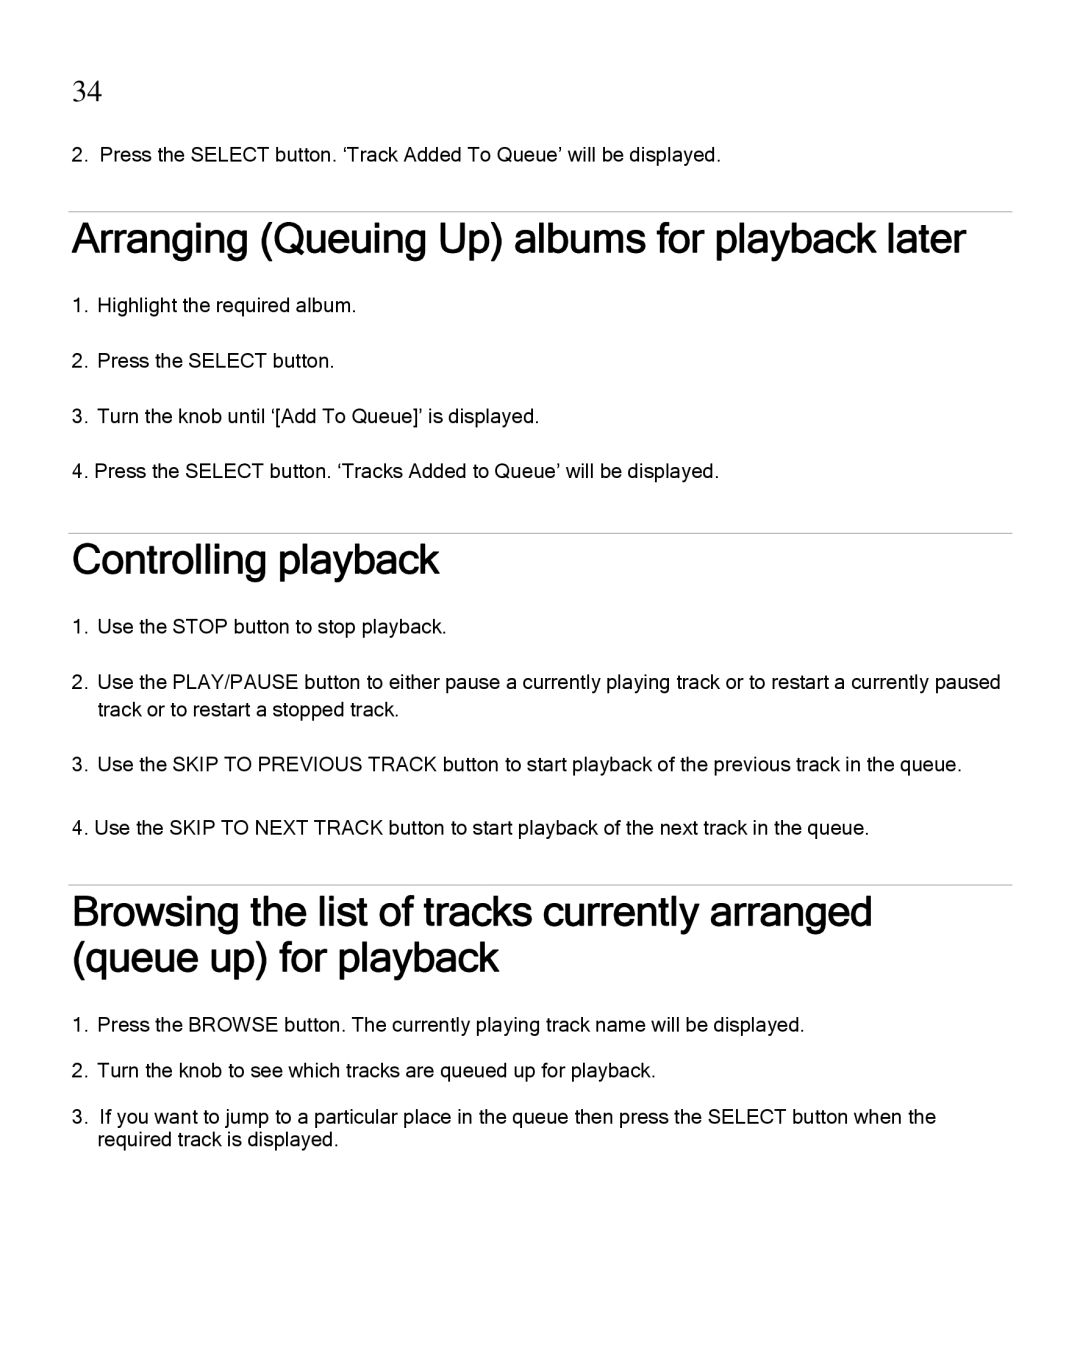 Grace GDI-IRA500 manual Arranging Queuing Up albums for playback later, Controlling playback 